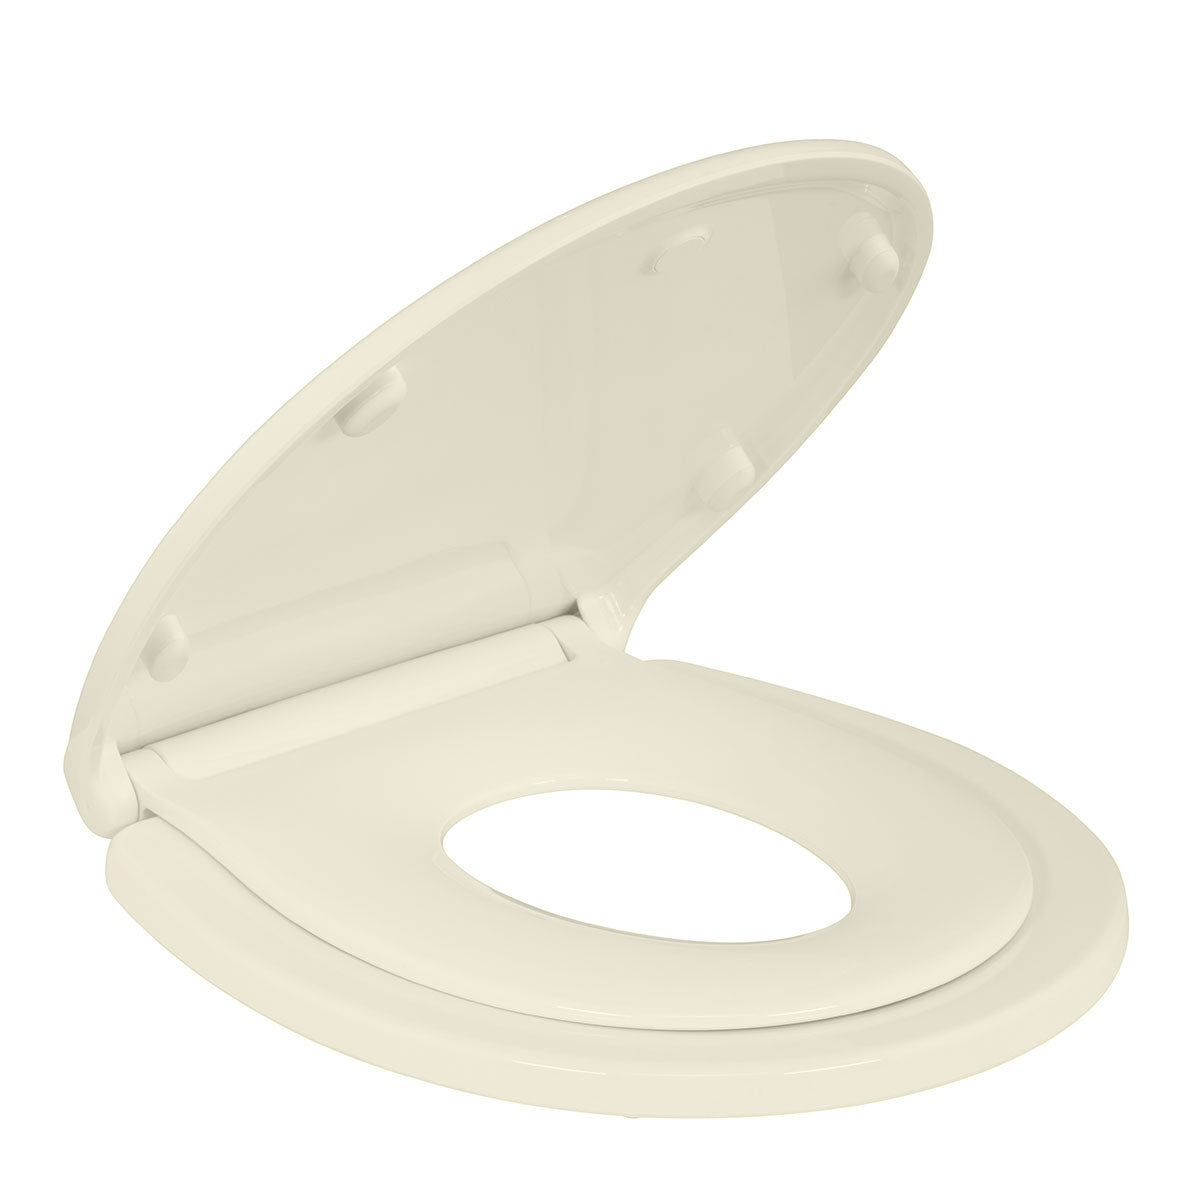 Almond/Bone Round Kingsport Family Toilet Seat with Built-In Child Seat